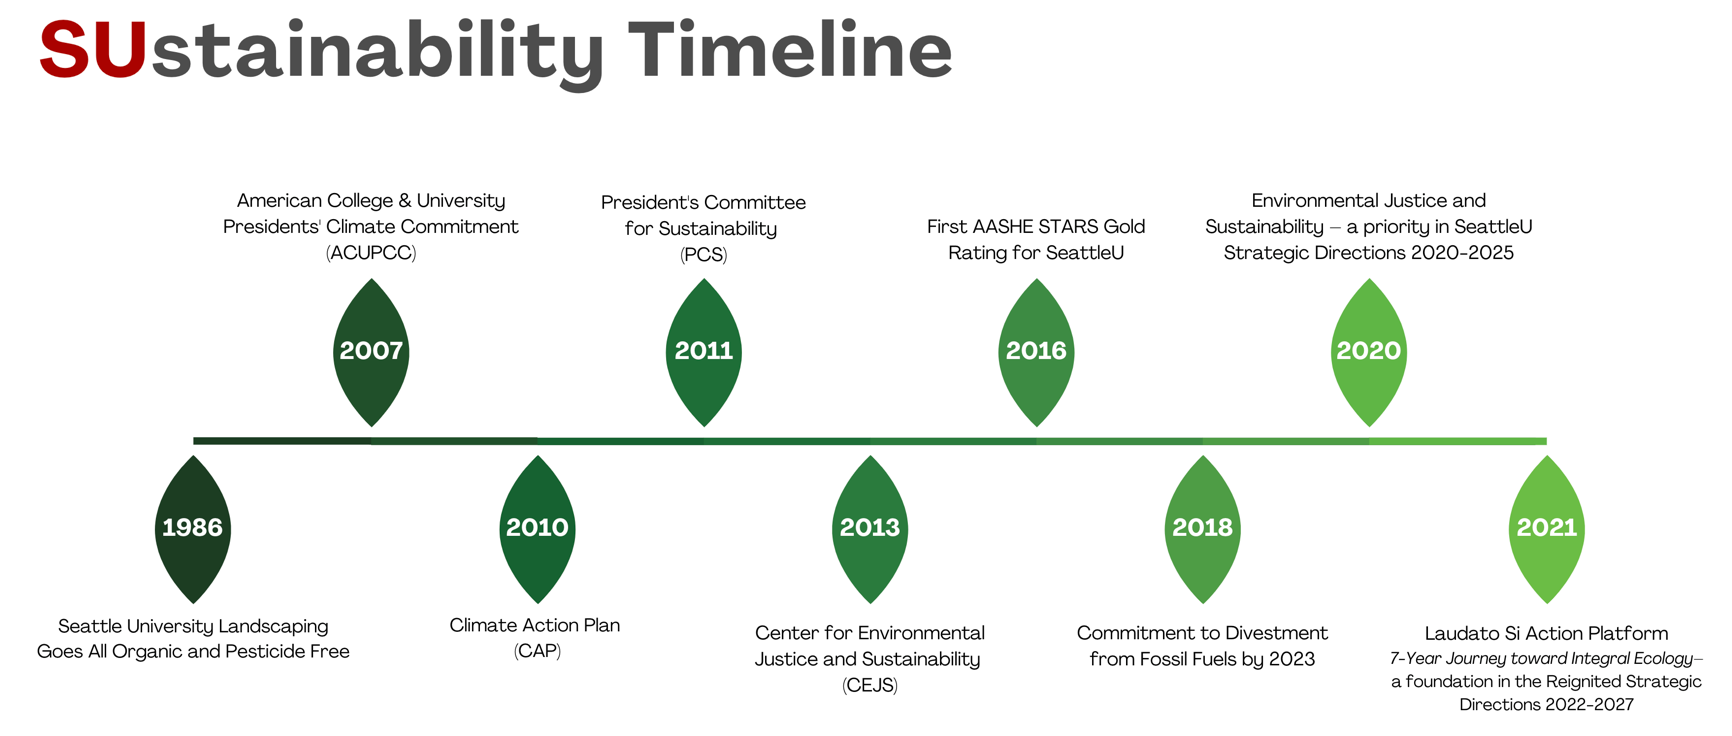 Timeline of major sustainability initiatives by SU since 1986